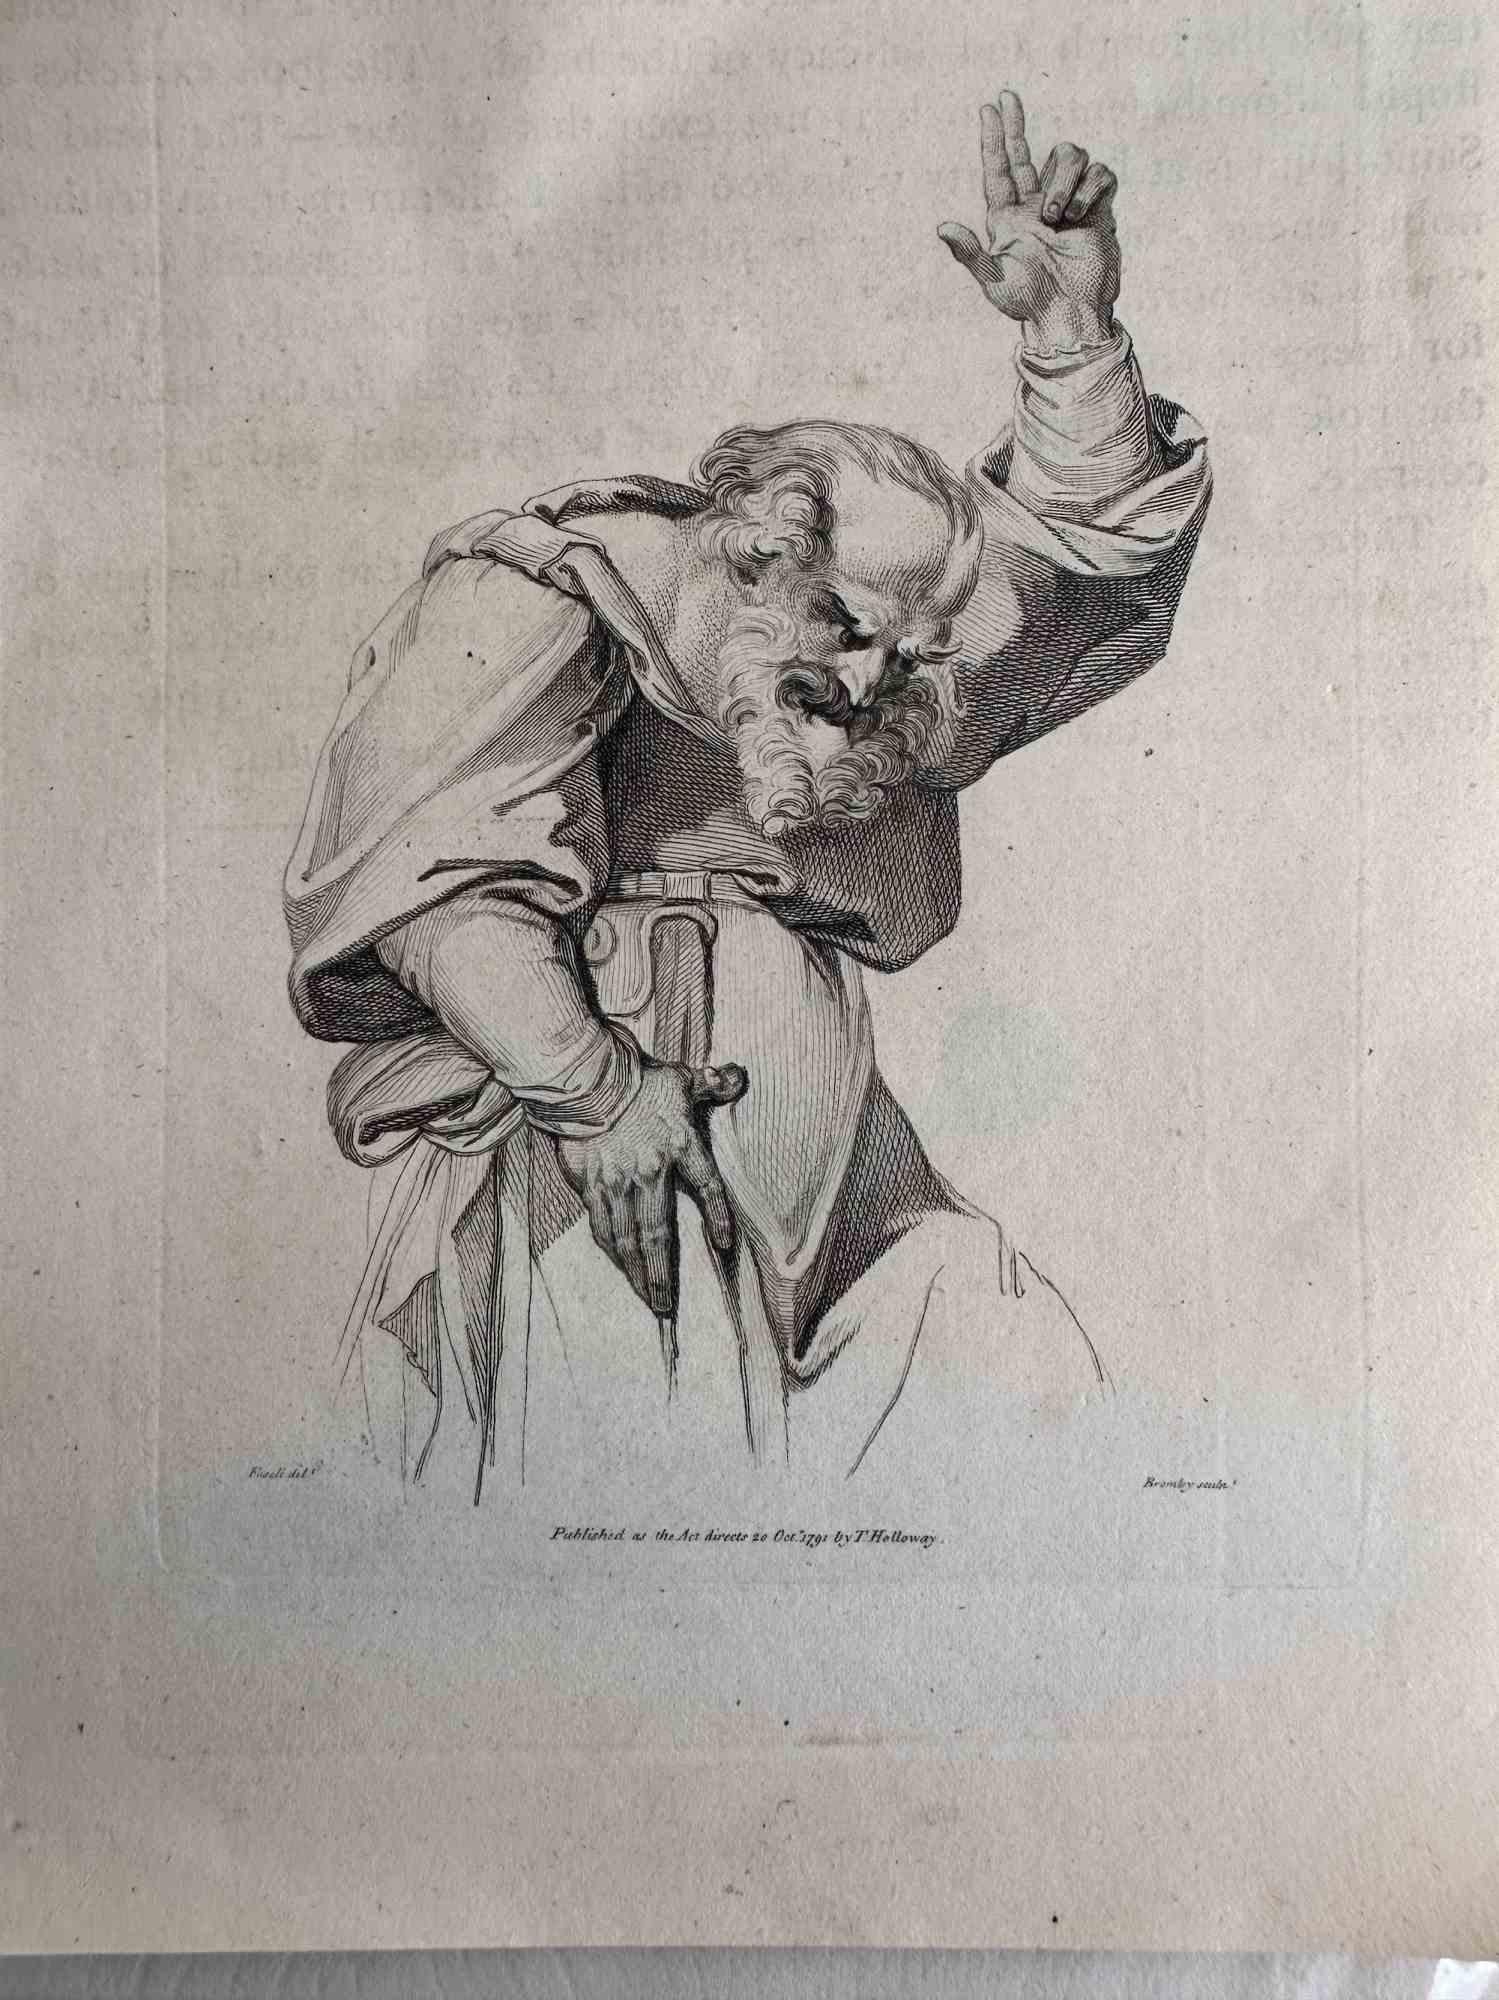 Henry Fuseli Figurative Print - An Old Prophet Preaching - Etching - Late 18th century